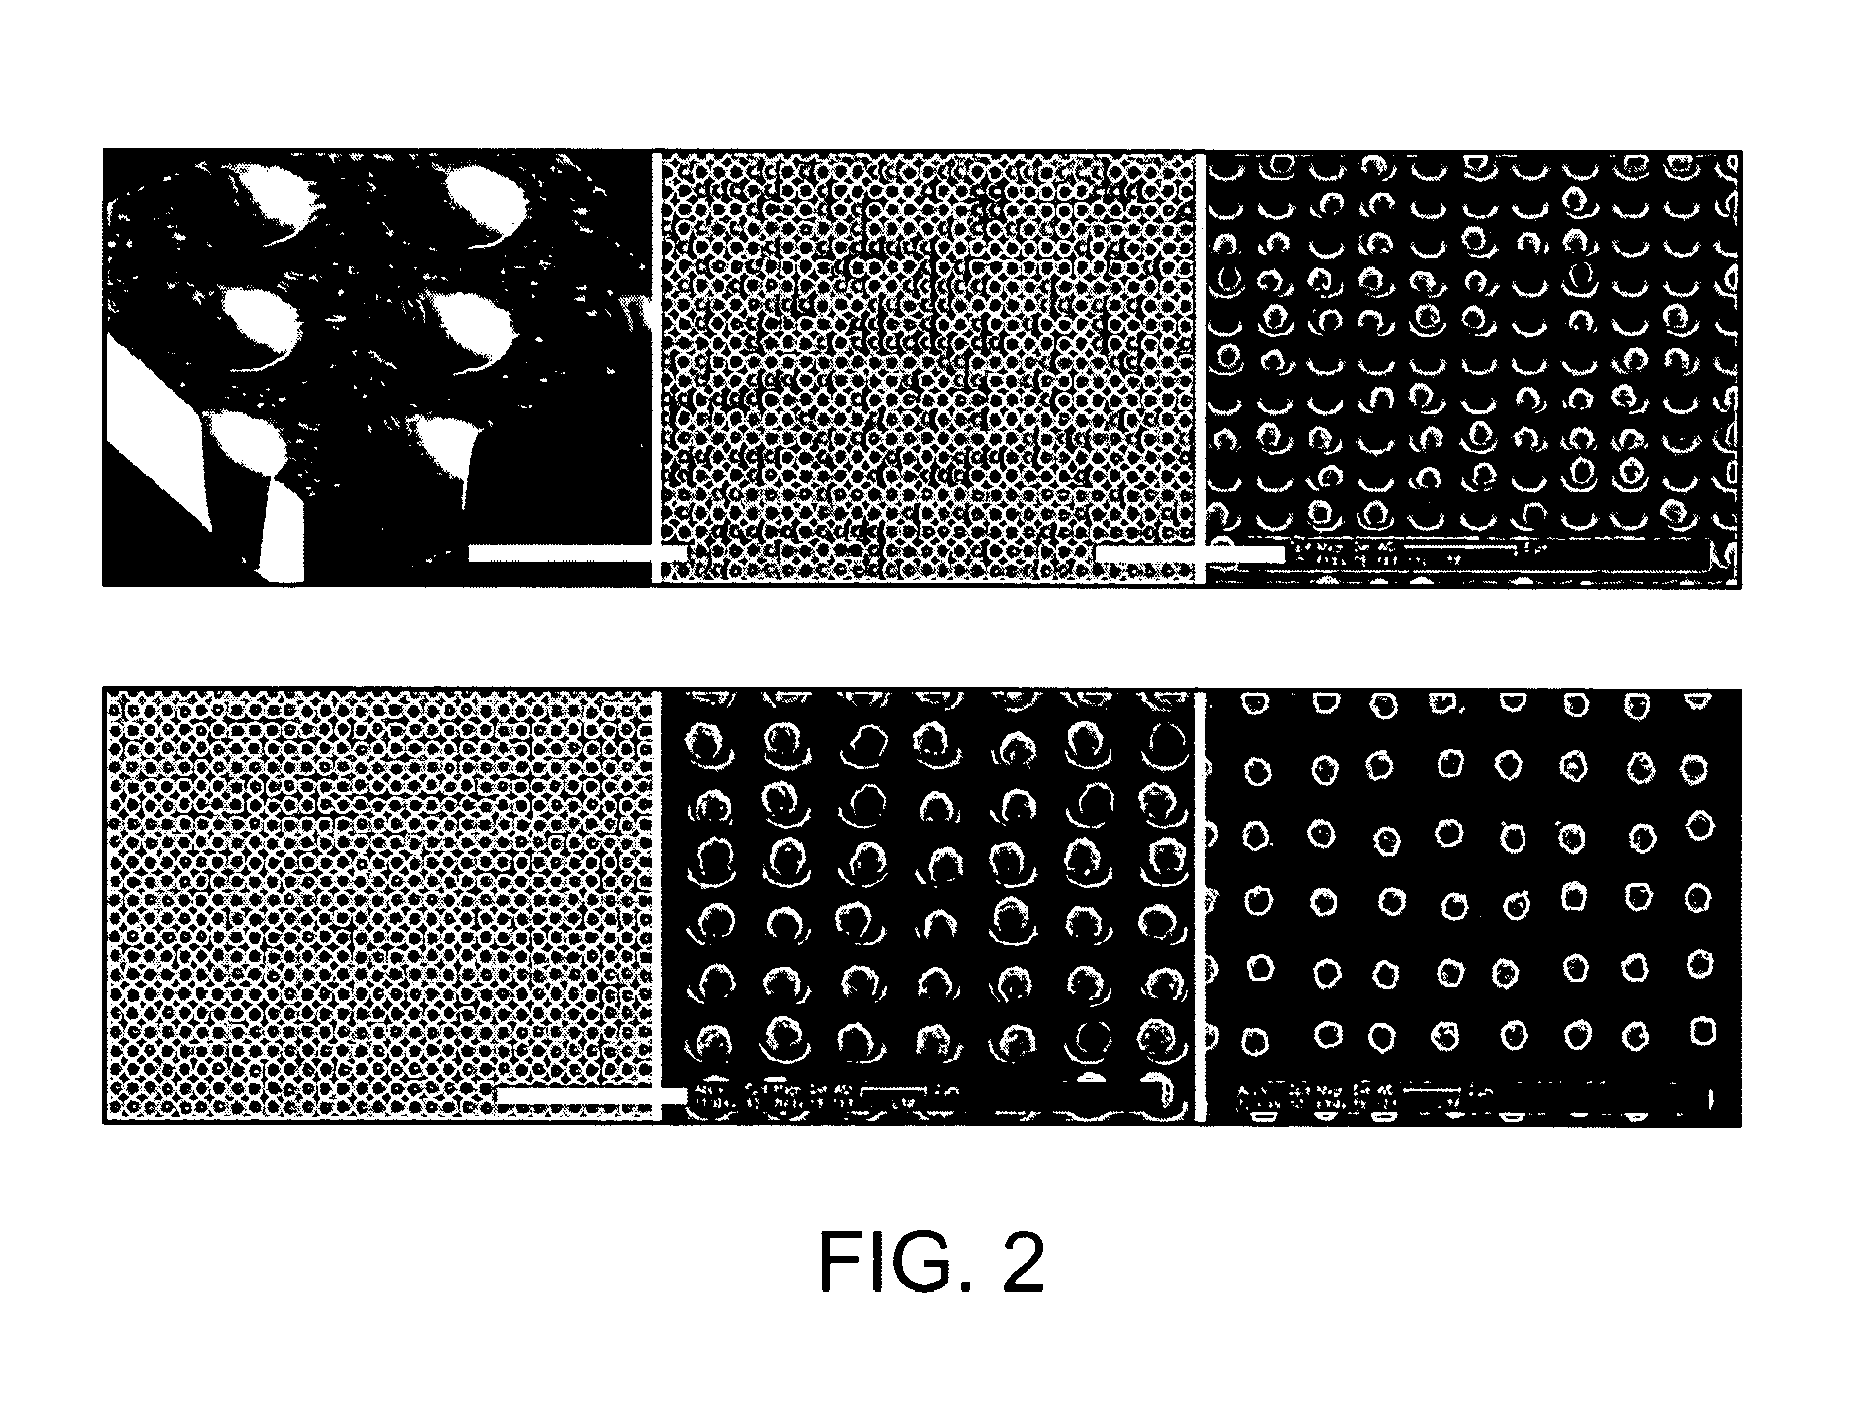 Methods and devices for biomolecular arrays